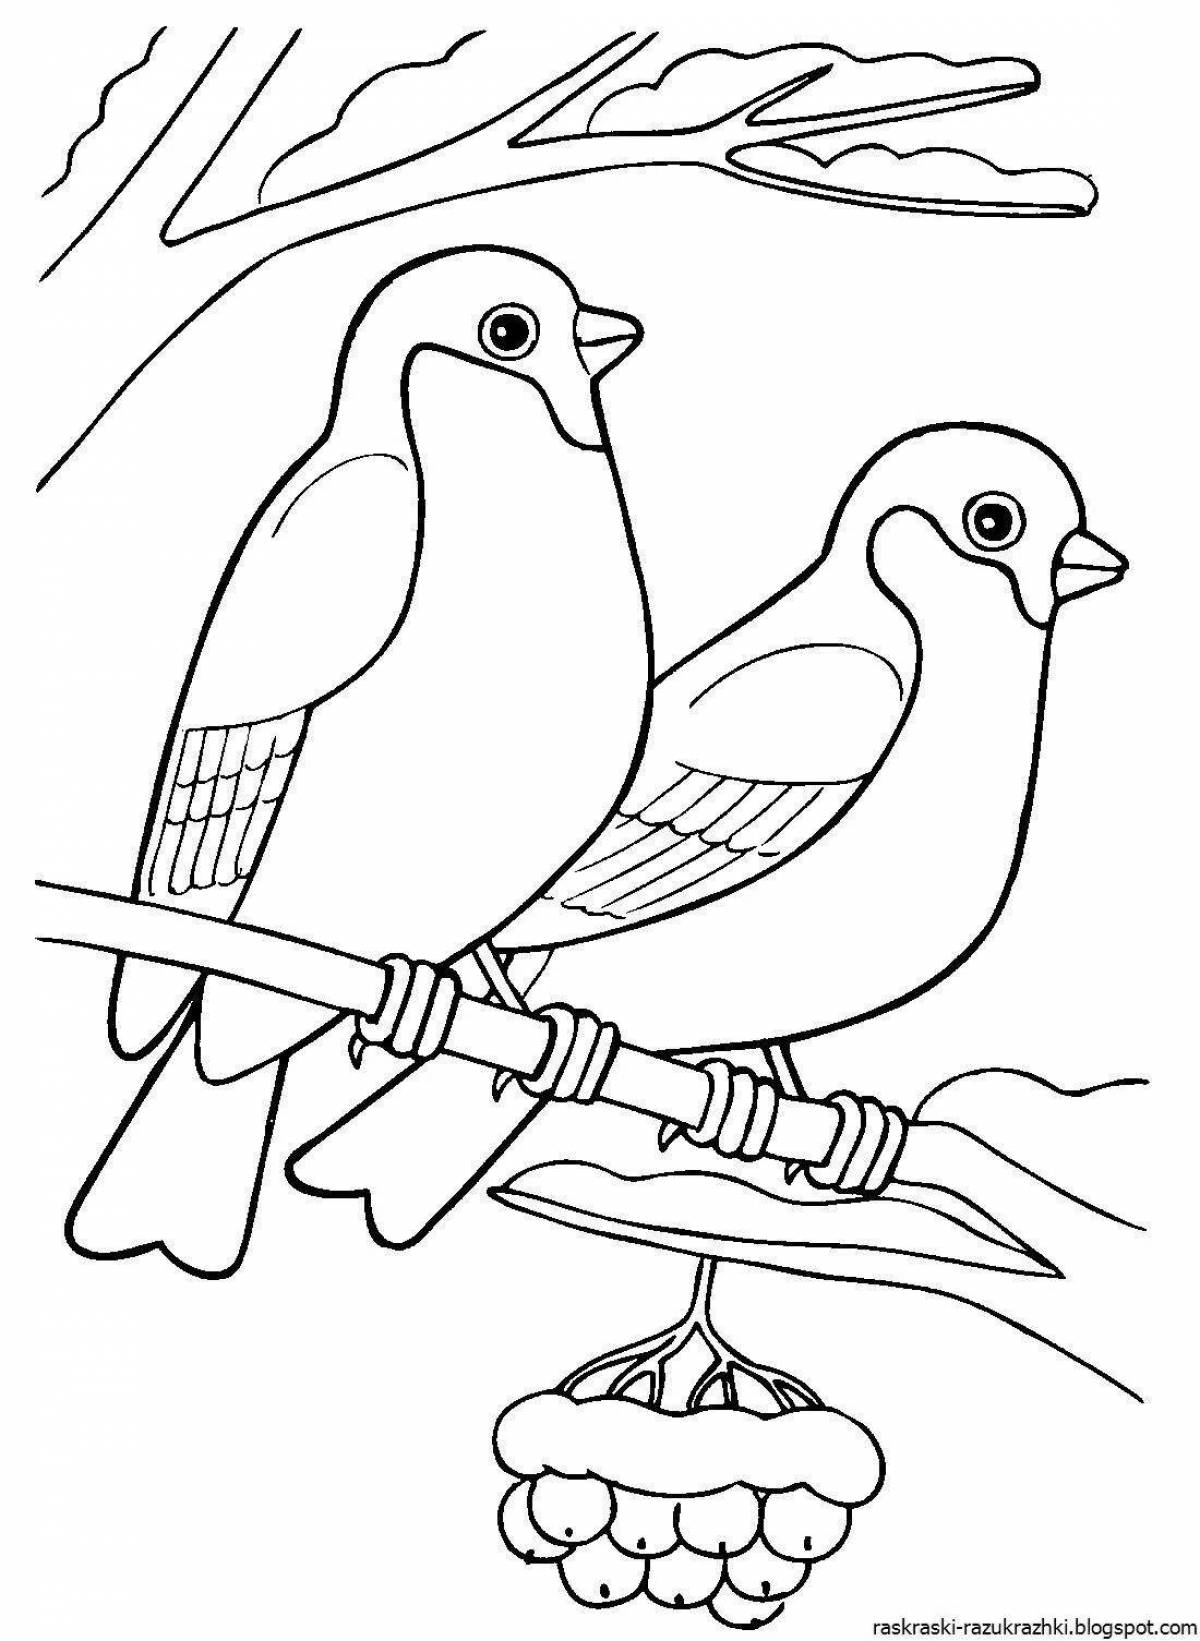 Dazzling winter birds coloring book for 4-5 year olds